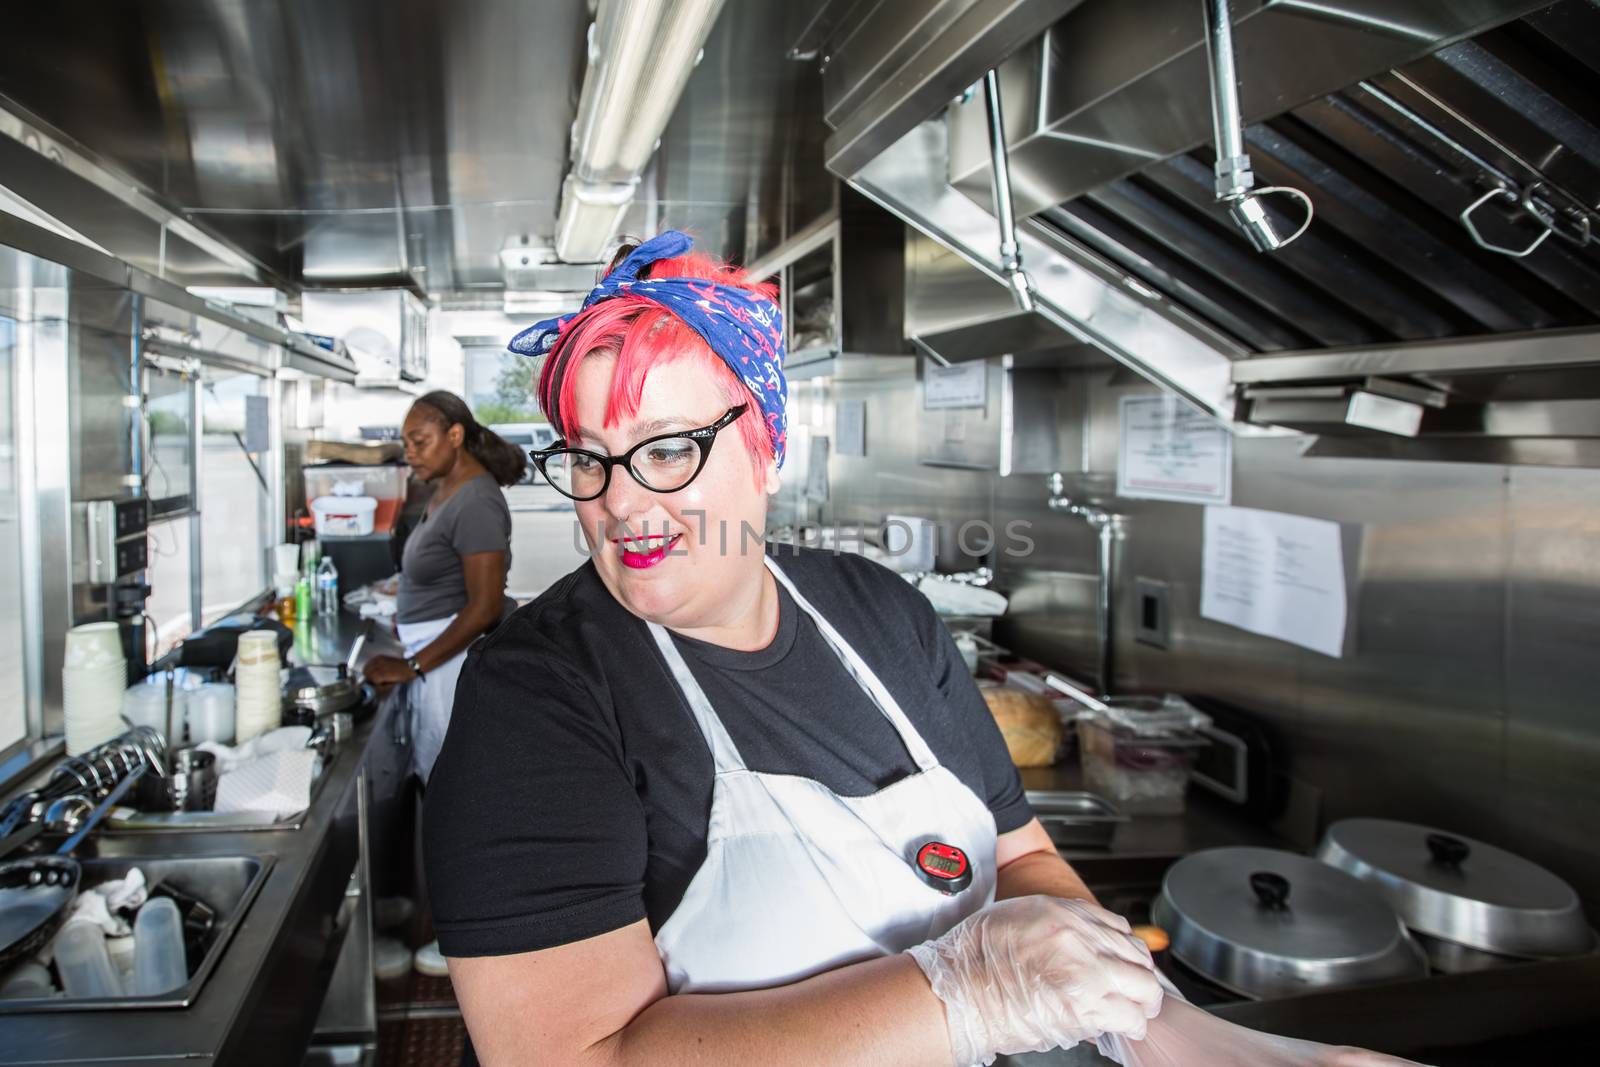 Pink haired chef puts on work gloves aboard busy food truck